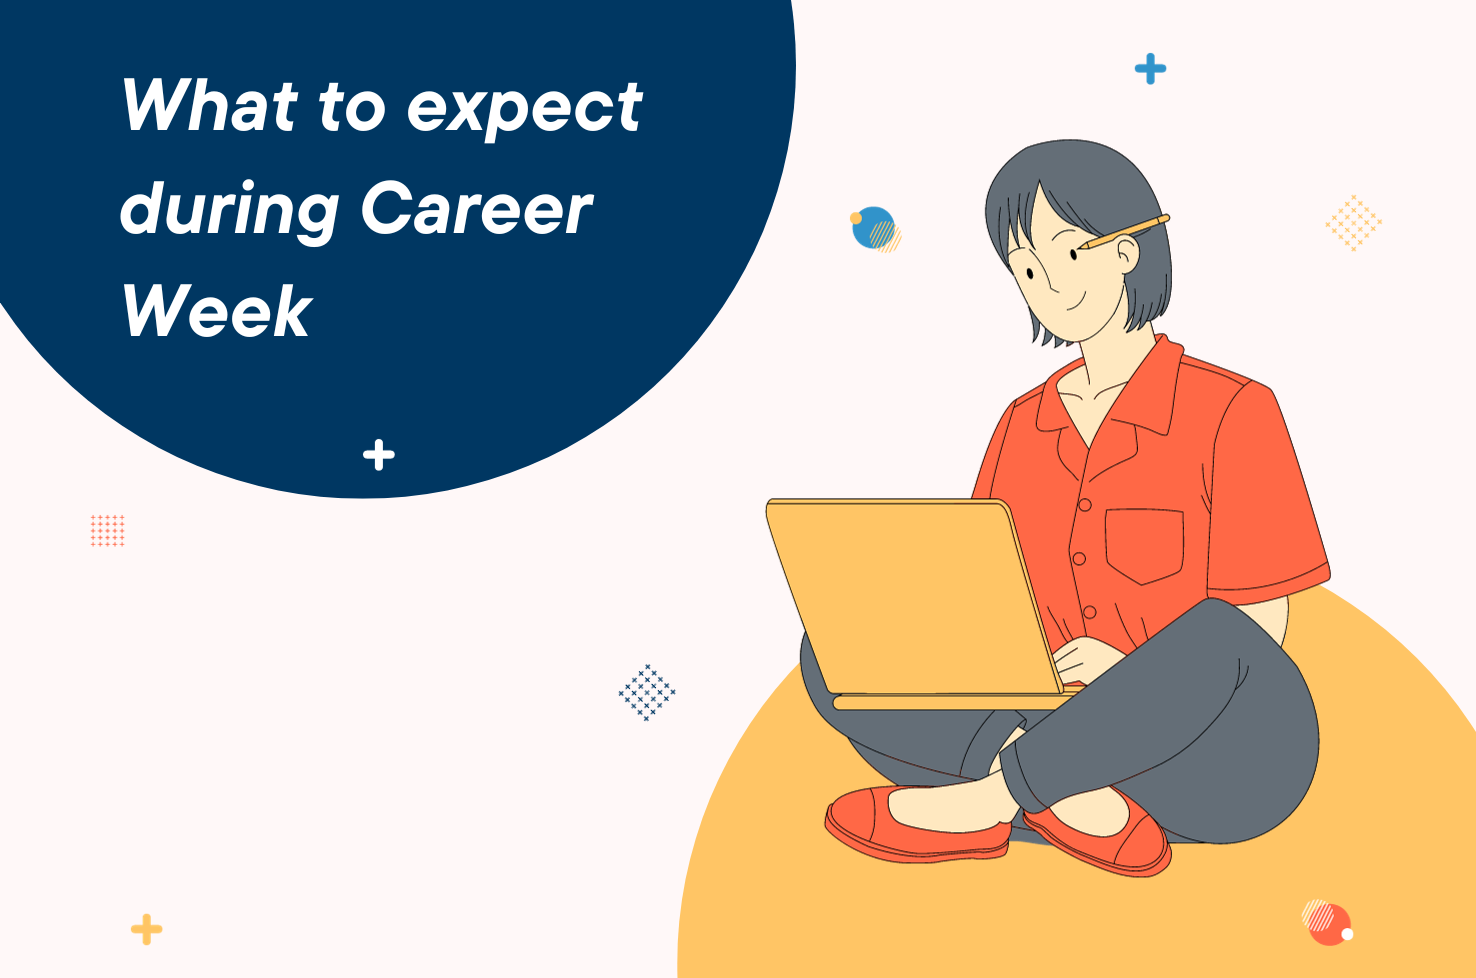 What to expect during Career Week